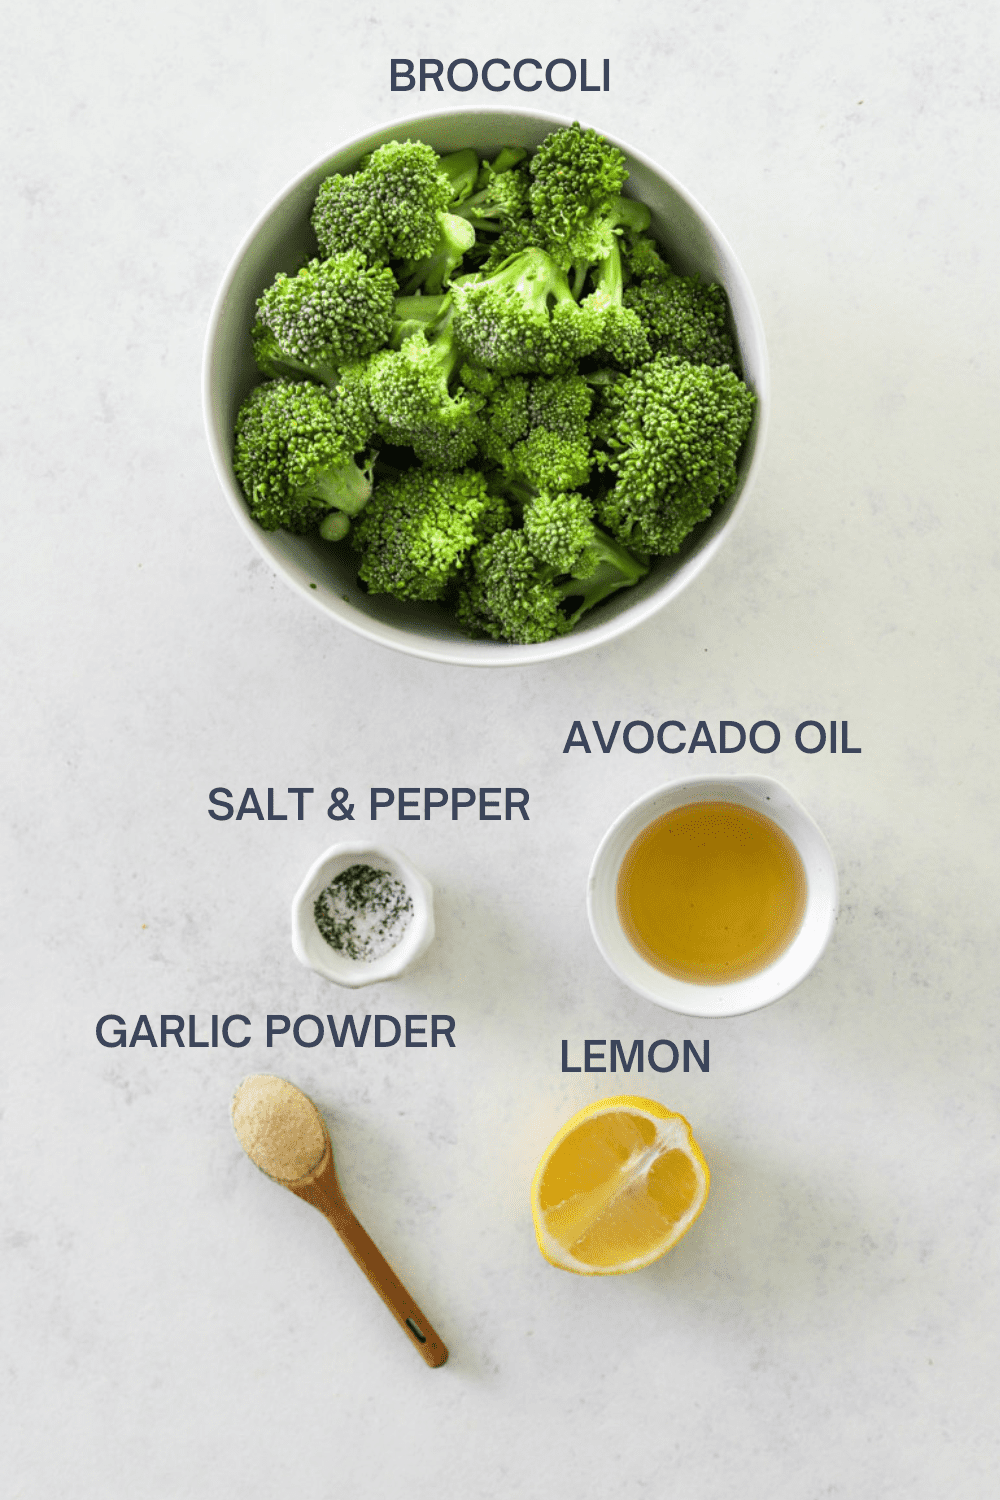 Roasted broccoli ingredients with labels. 